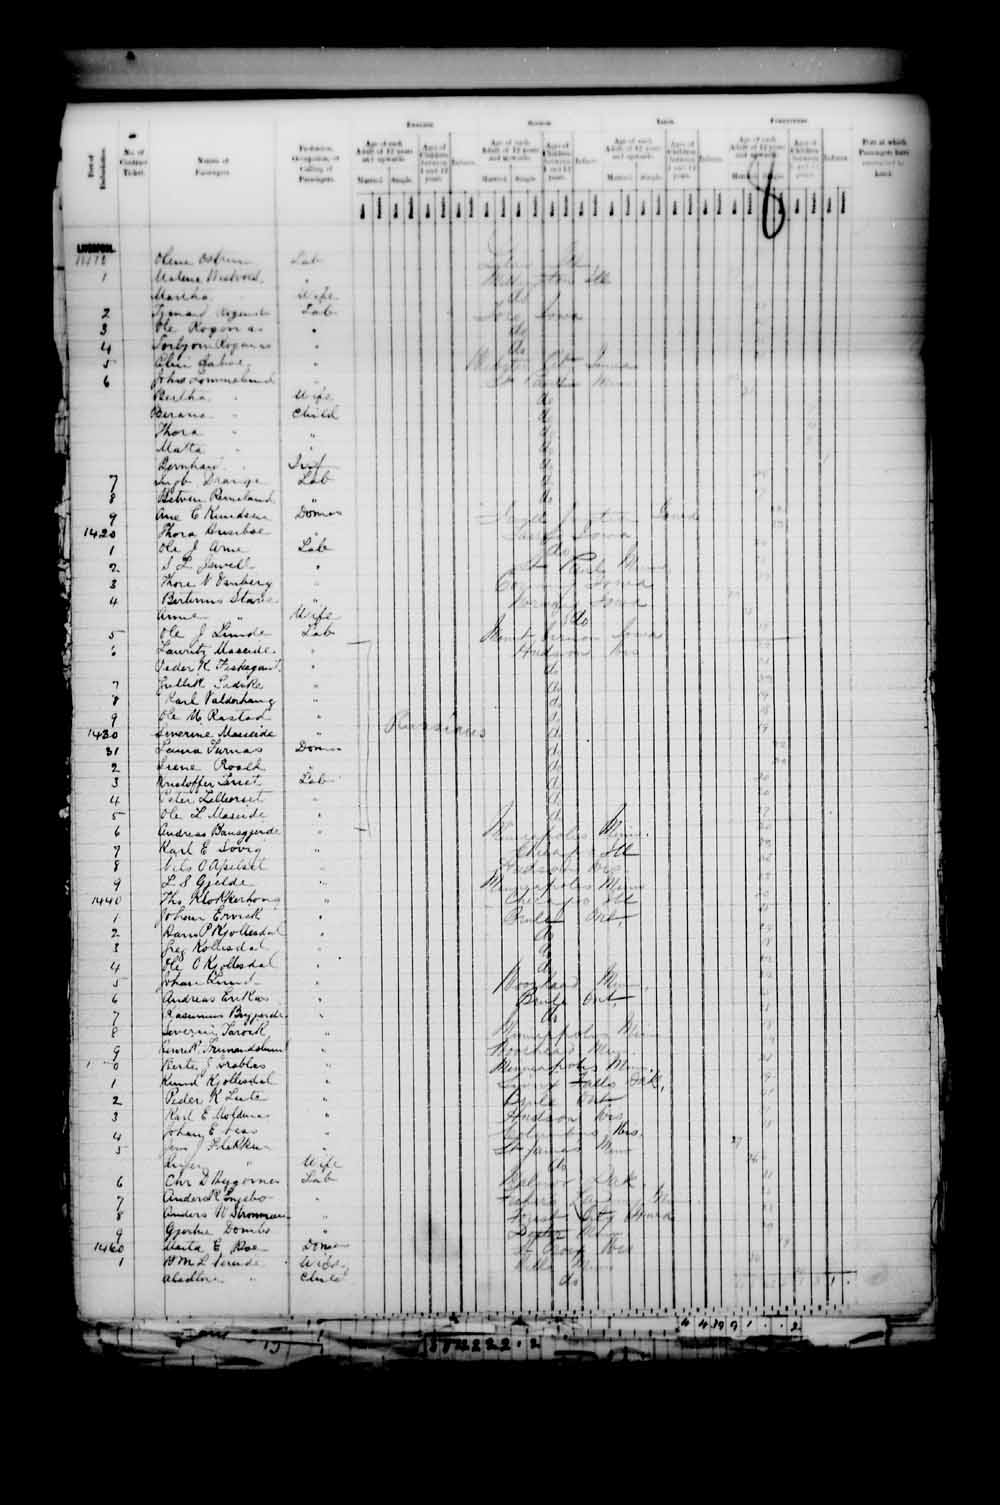 Digitized page of Quebec Passenger Lists for Image No.: e003546736